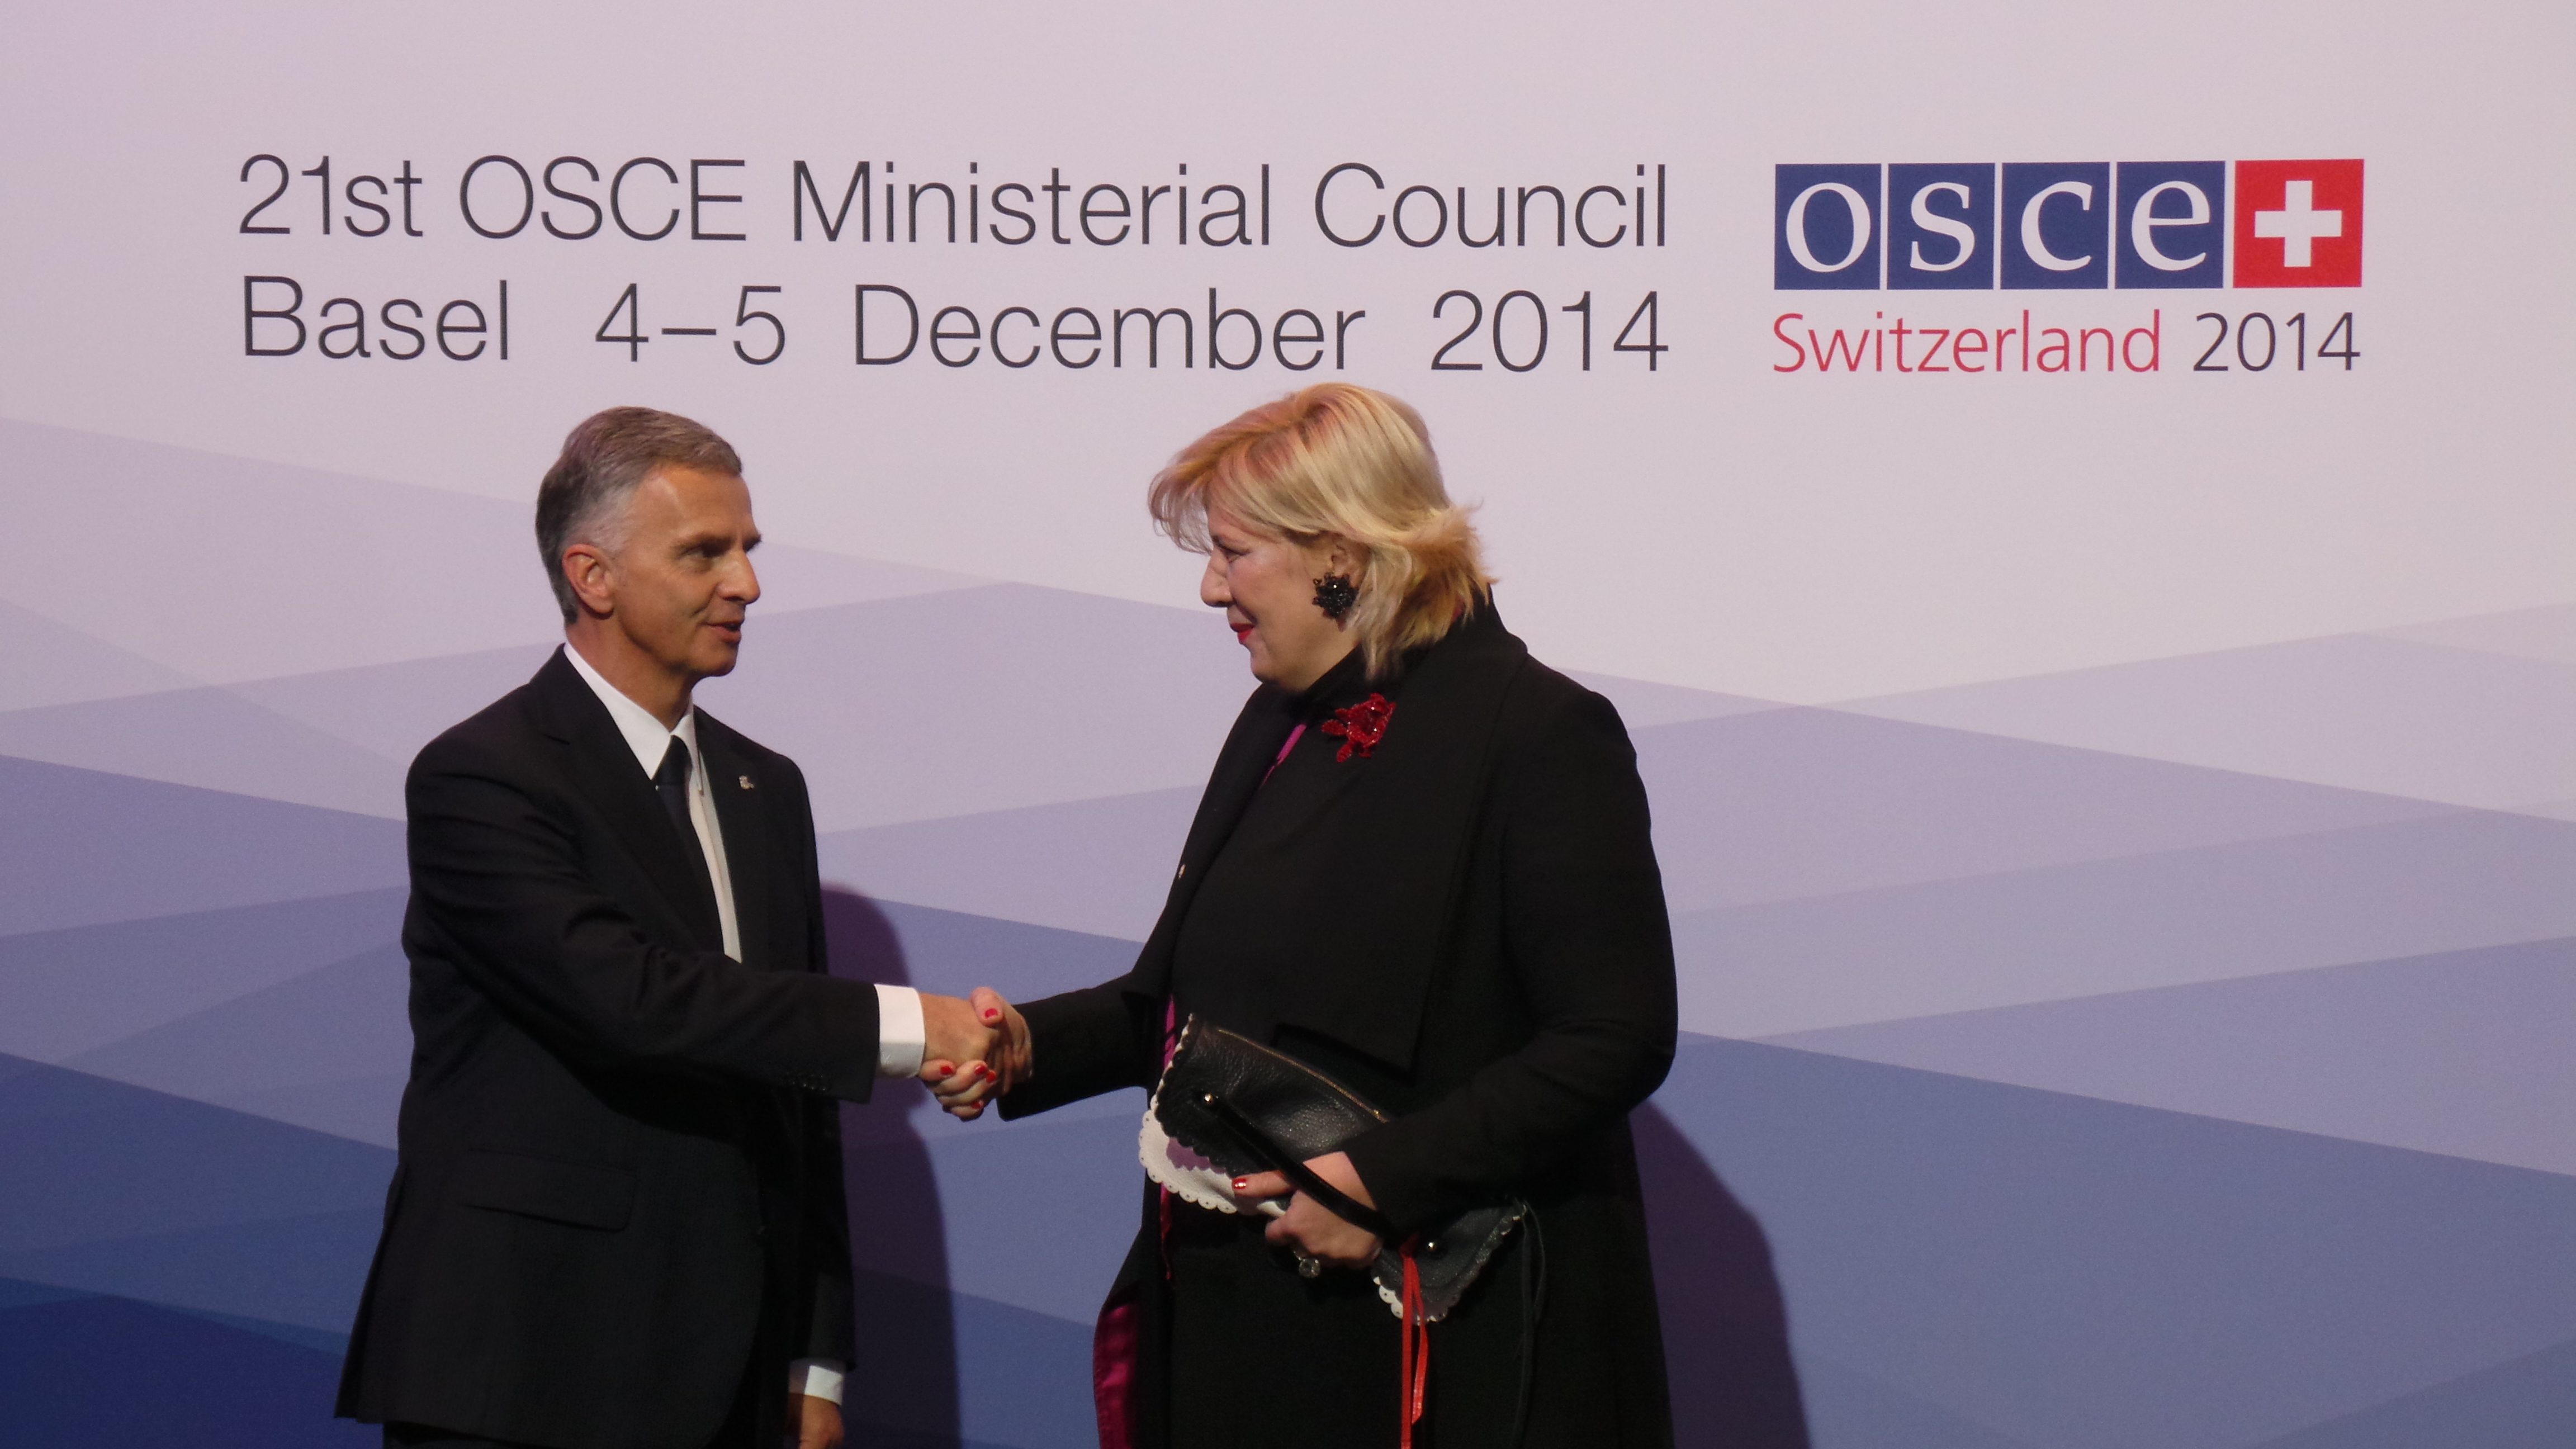 The President of the Swiss Confederation, Didier Burkhalter, greets Duja Mijatovic, Representative on Freedom of the Media at the OSCE Ministerial Council 2014 in Basel